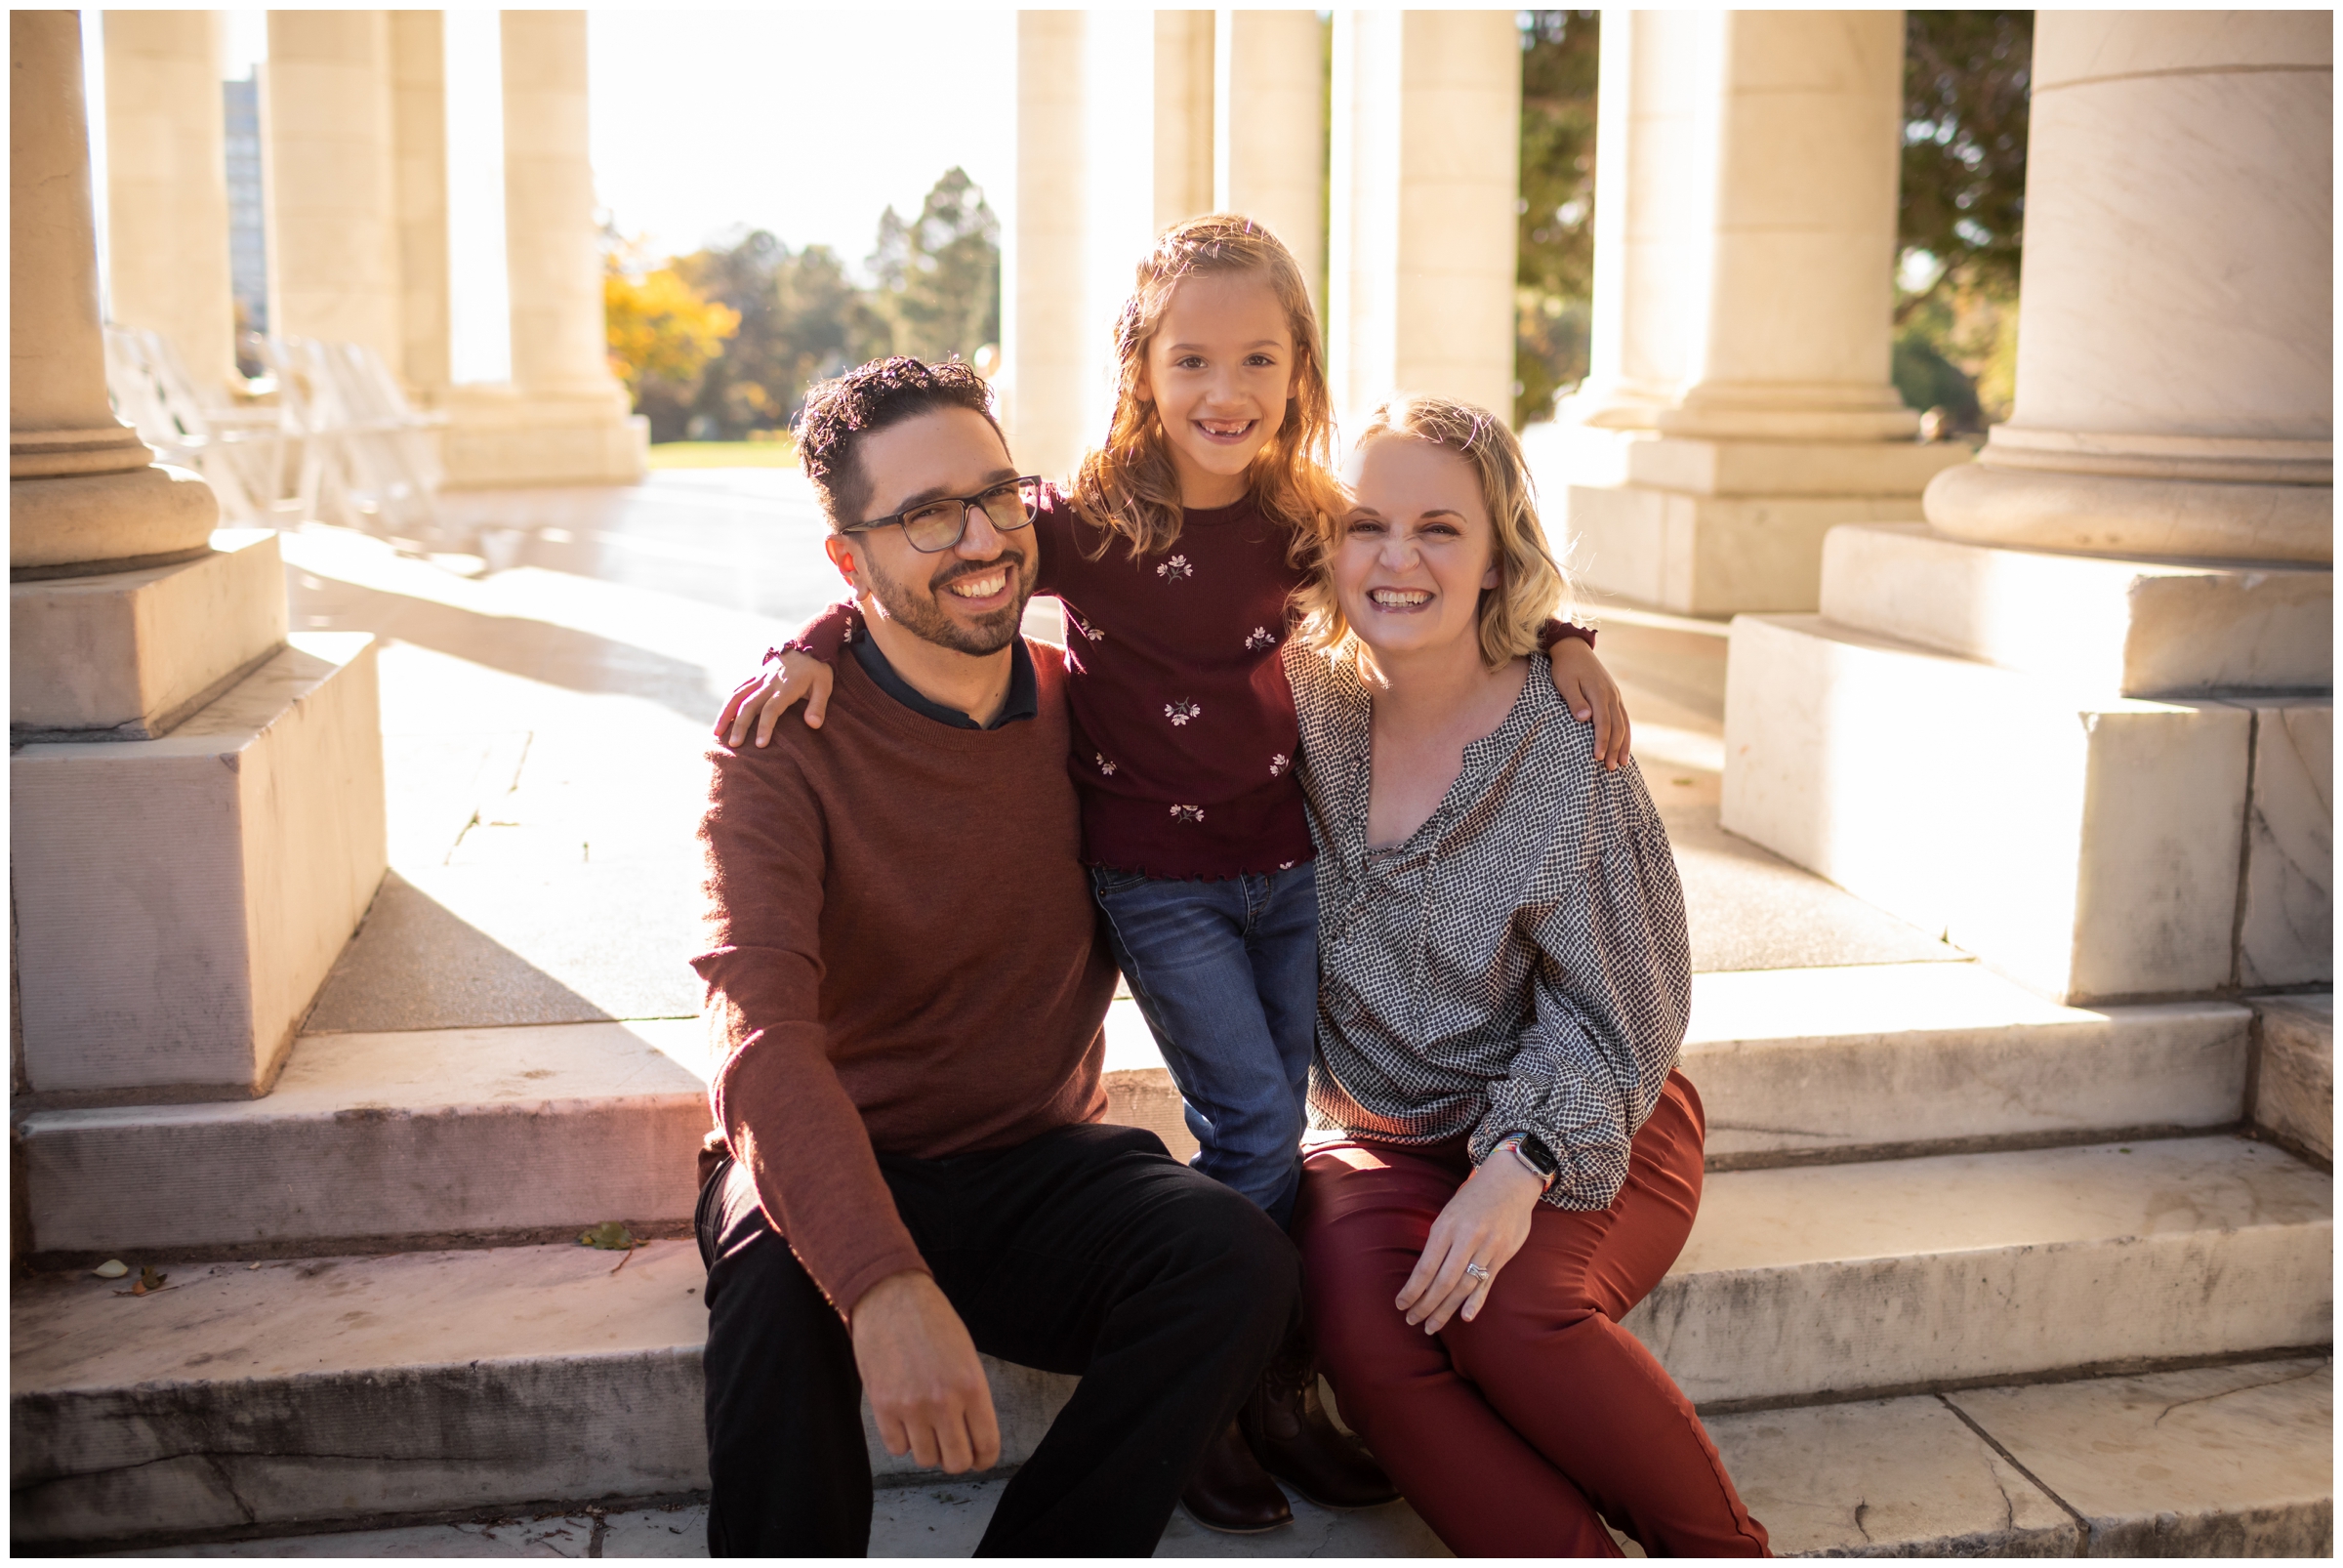 Denver family portraits during fall at Cheesman Park by Colorado photographer Plum Pretty Photography